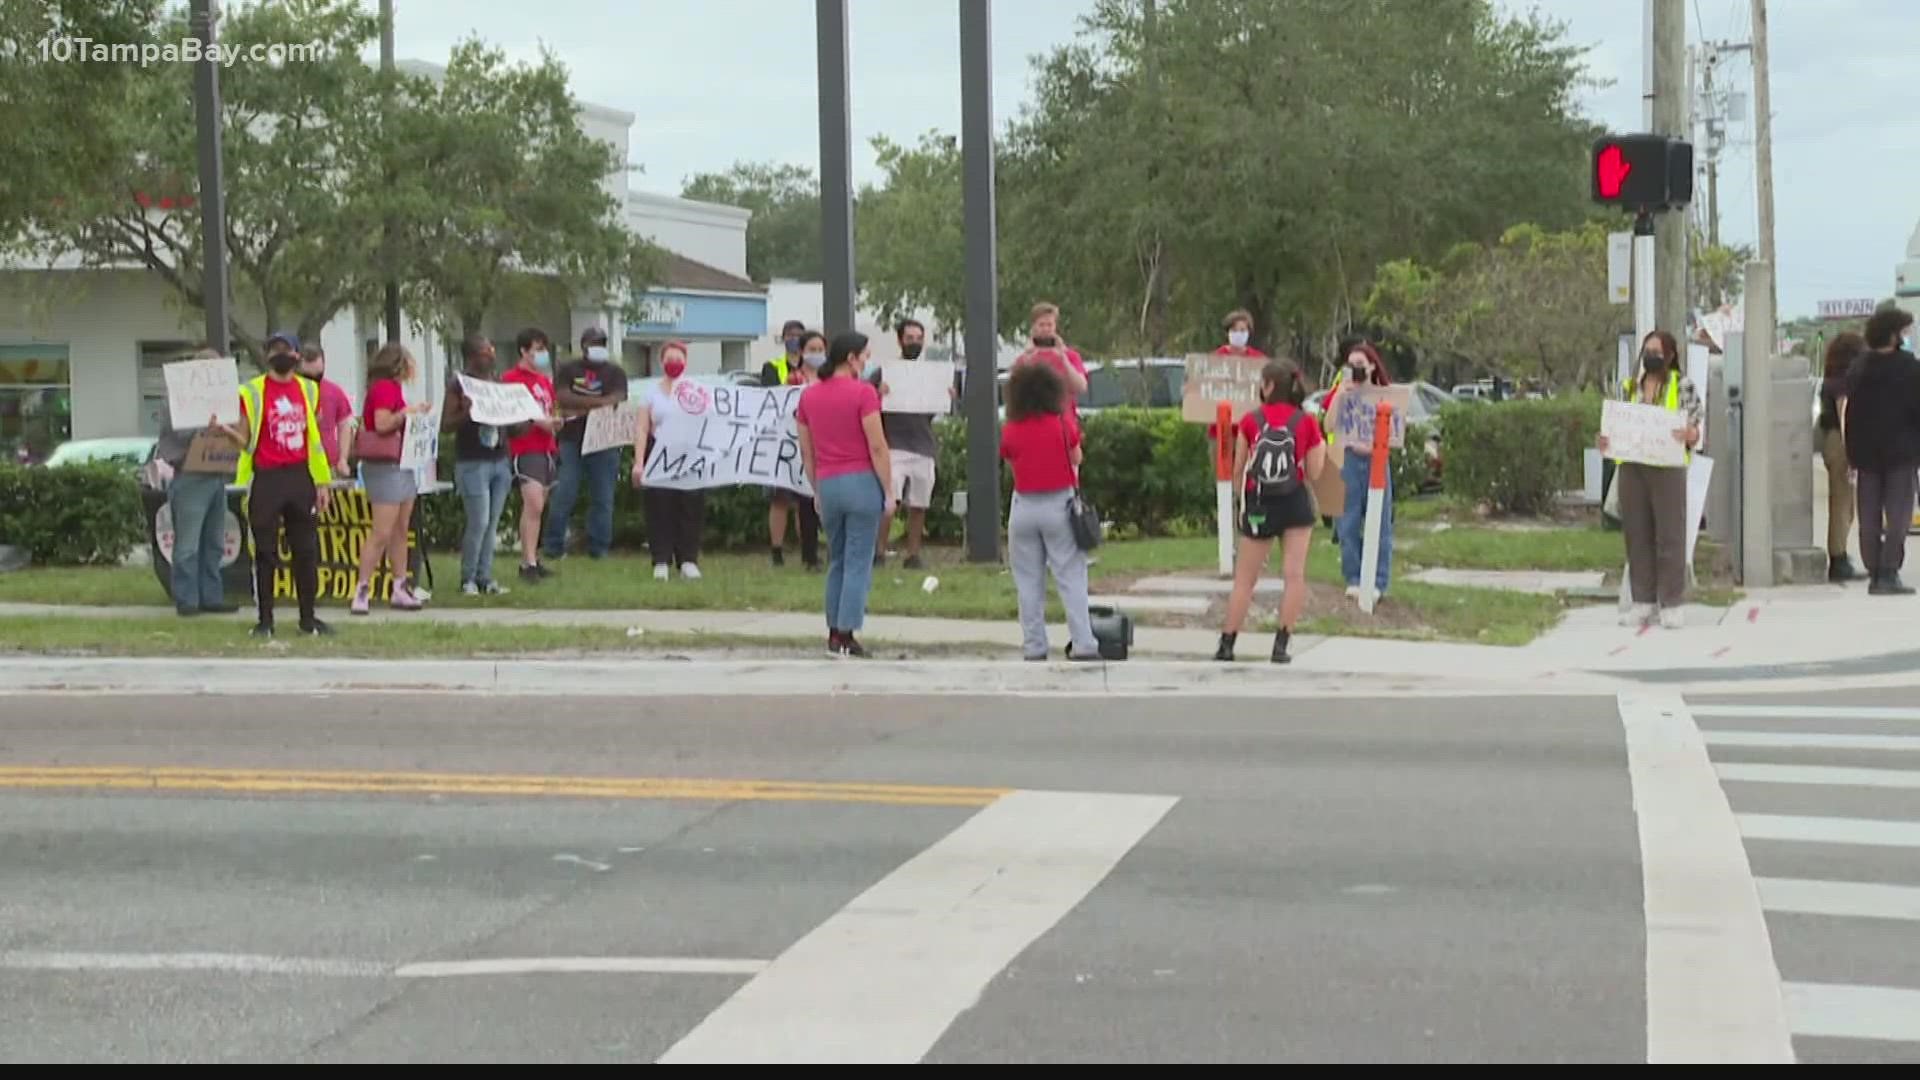 A group of more than twenty people gathered Sunday in Tampa, following another protest in St. Pete.